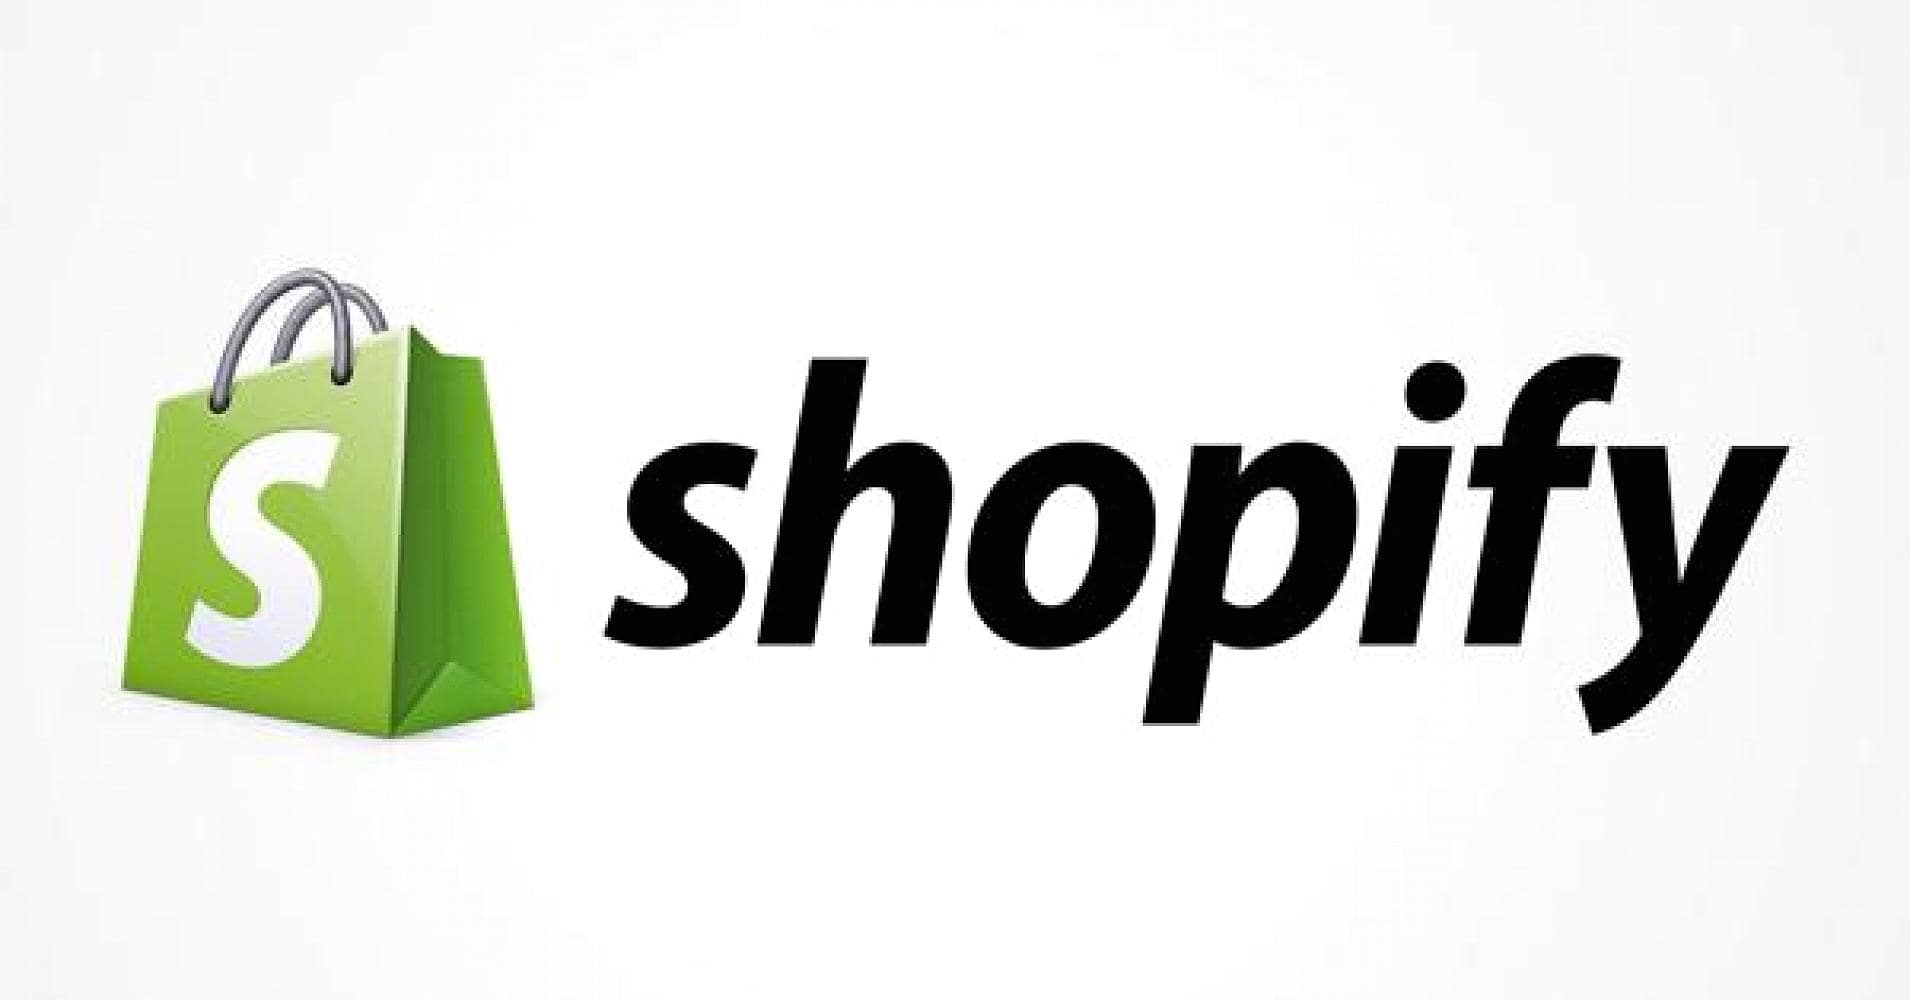 Shopify ecommerce technology platforms allows retailers to add many useful features with the integration of add-ons